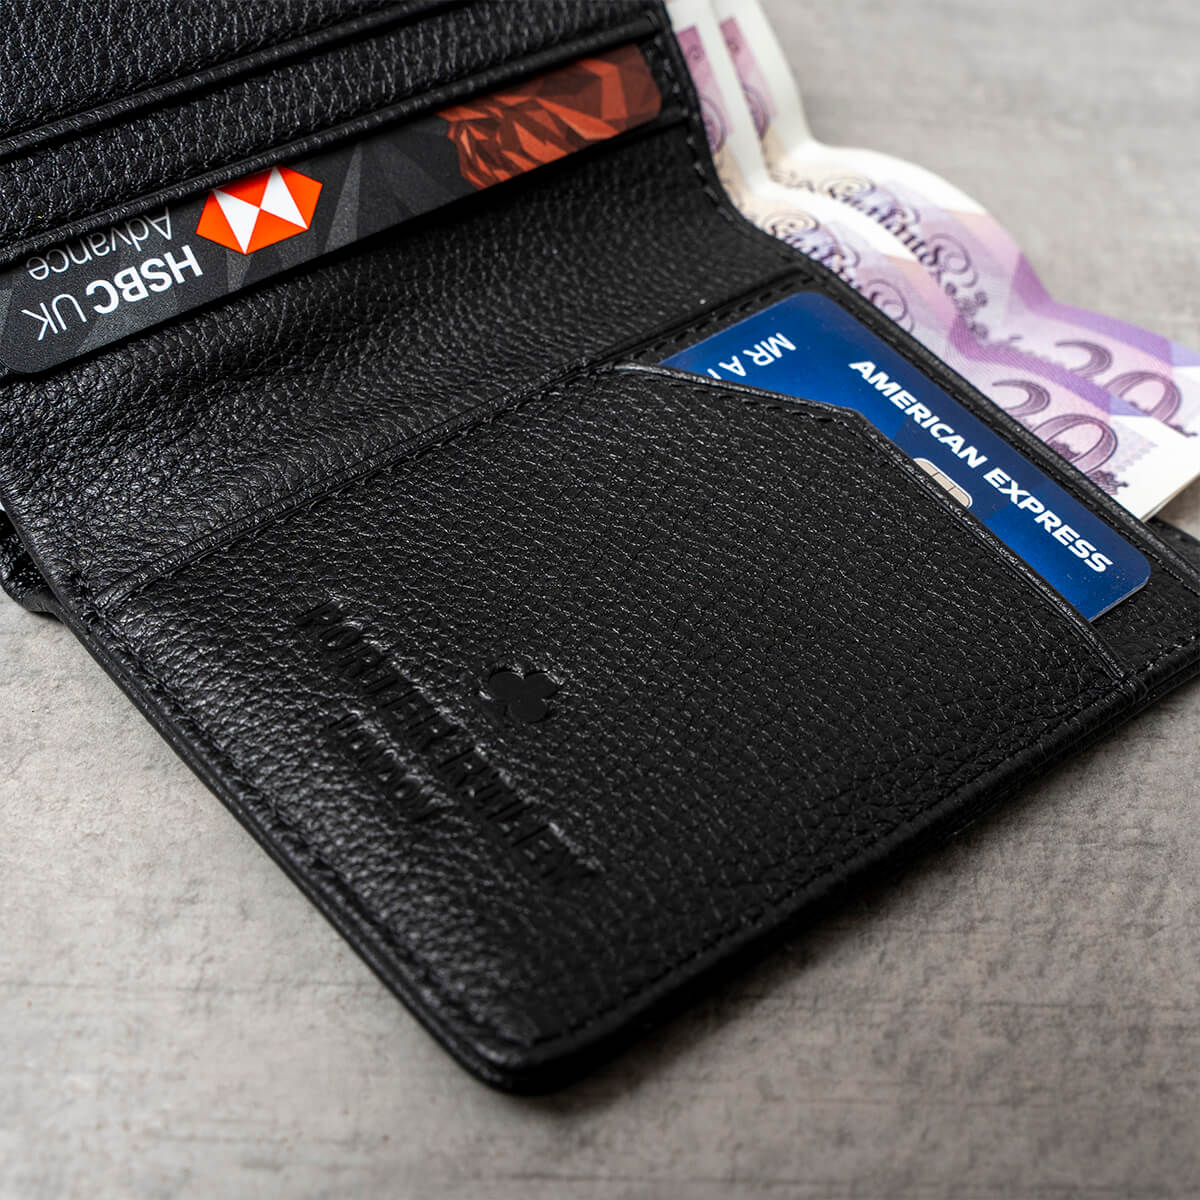 Porter Riley - Genuine Leather Men’s Billfold Wallet (RFID Blocking with 5 Credit Card Slots) Microfibre Lined Cash Compartment (Bifold) (Pure Black)